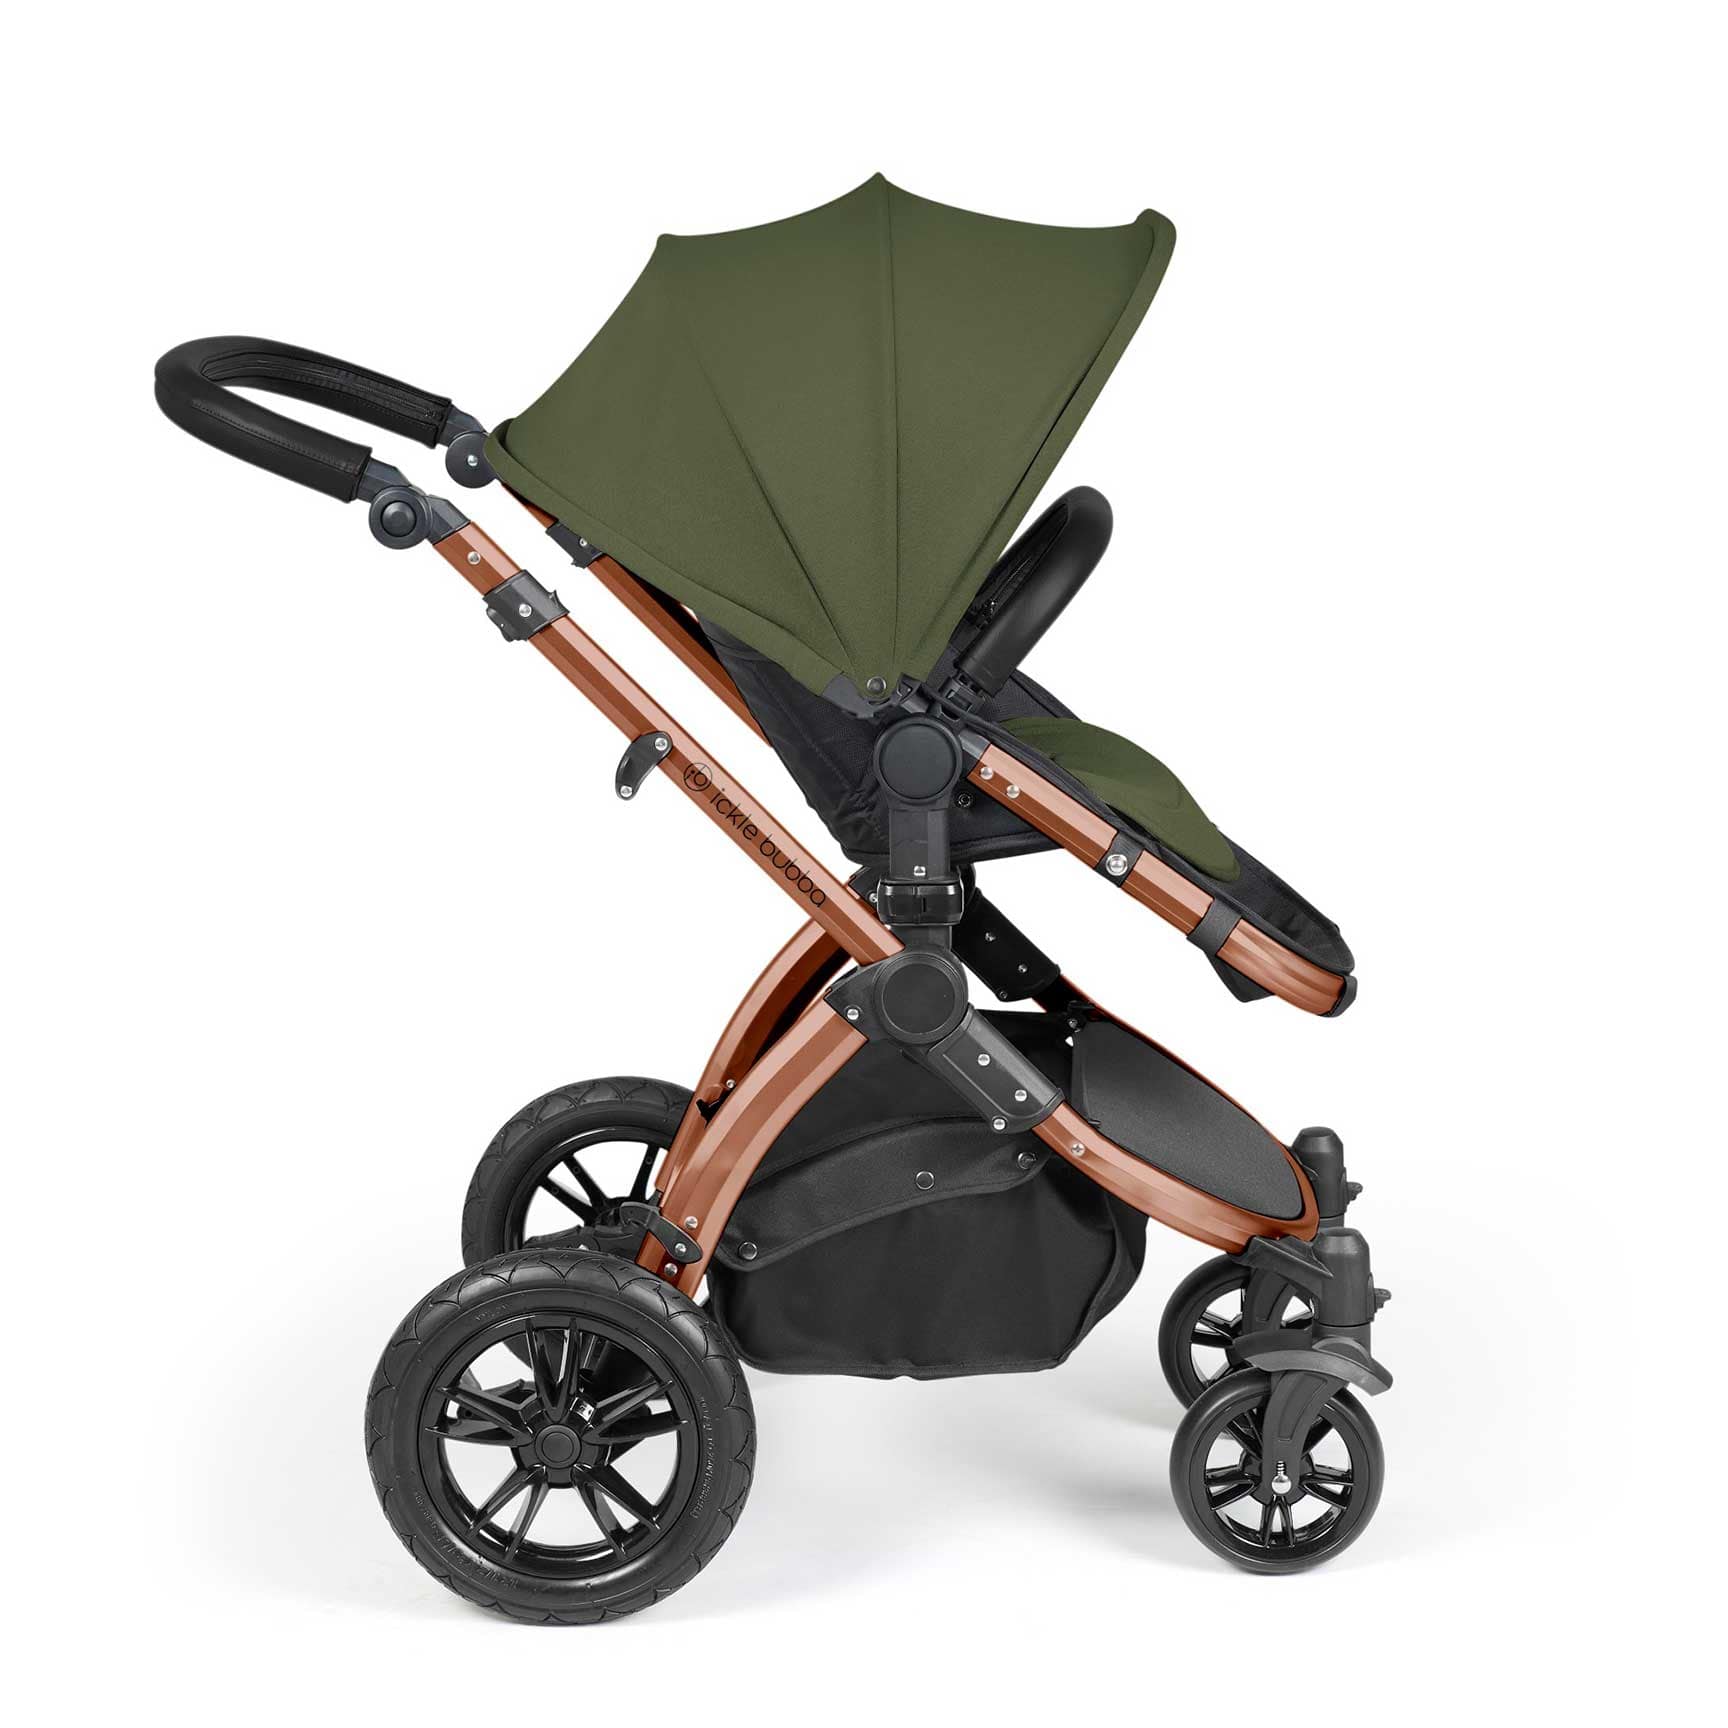 Ickle Bubba Stomp Luxe 2-in-1 Plus Pushchair & Carrycot in Bronze/Woodland/Black Travel Systems 10-003-001-140 5056515026399